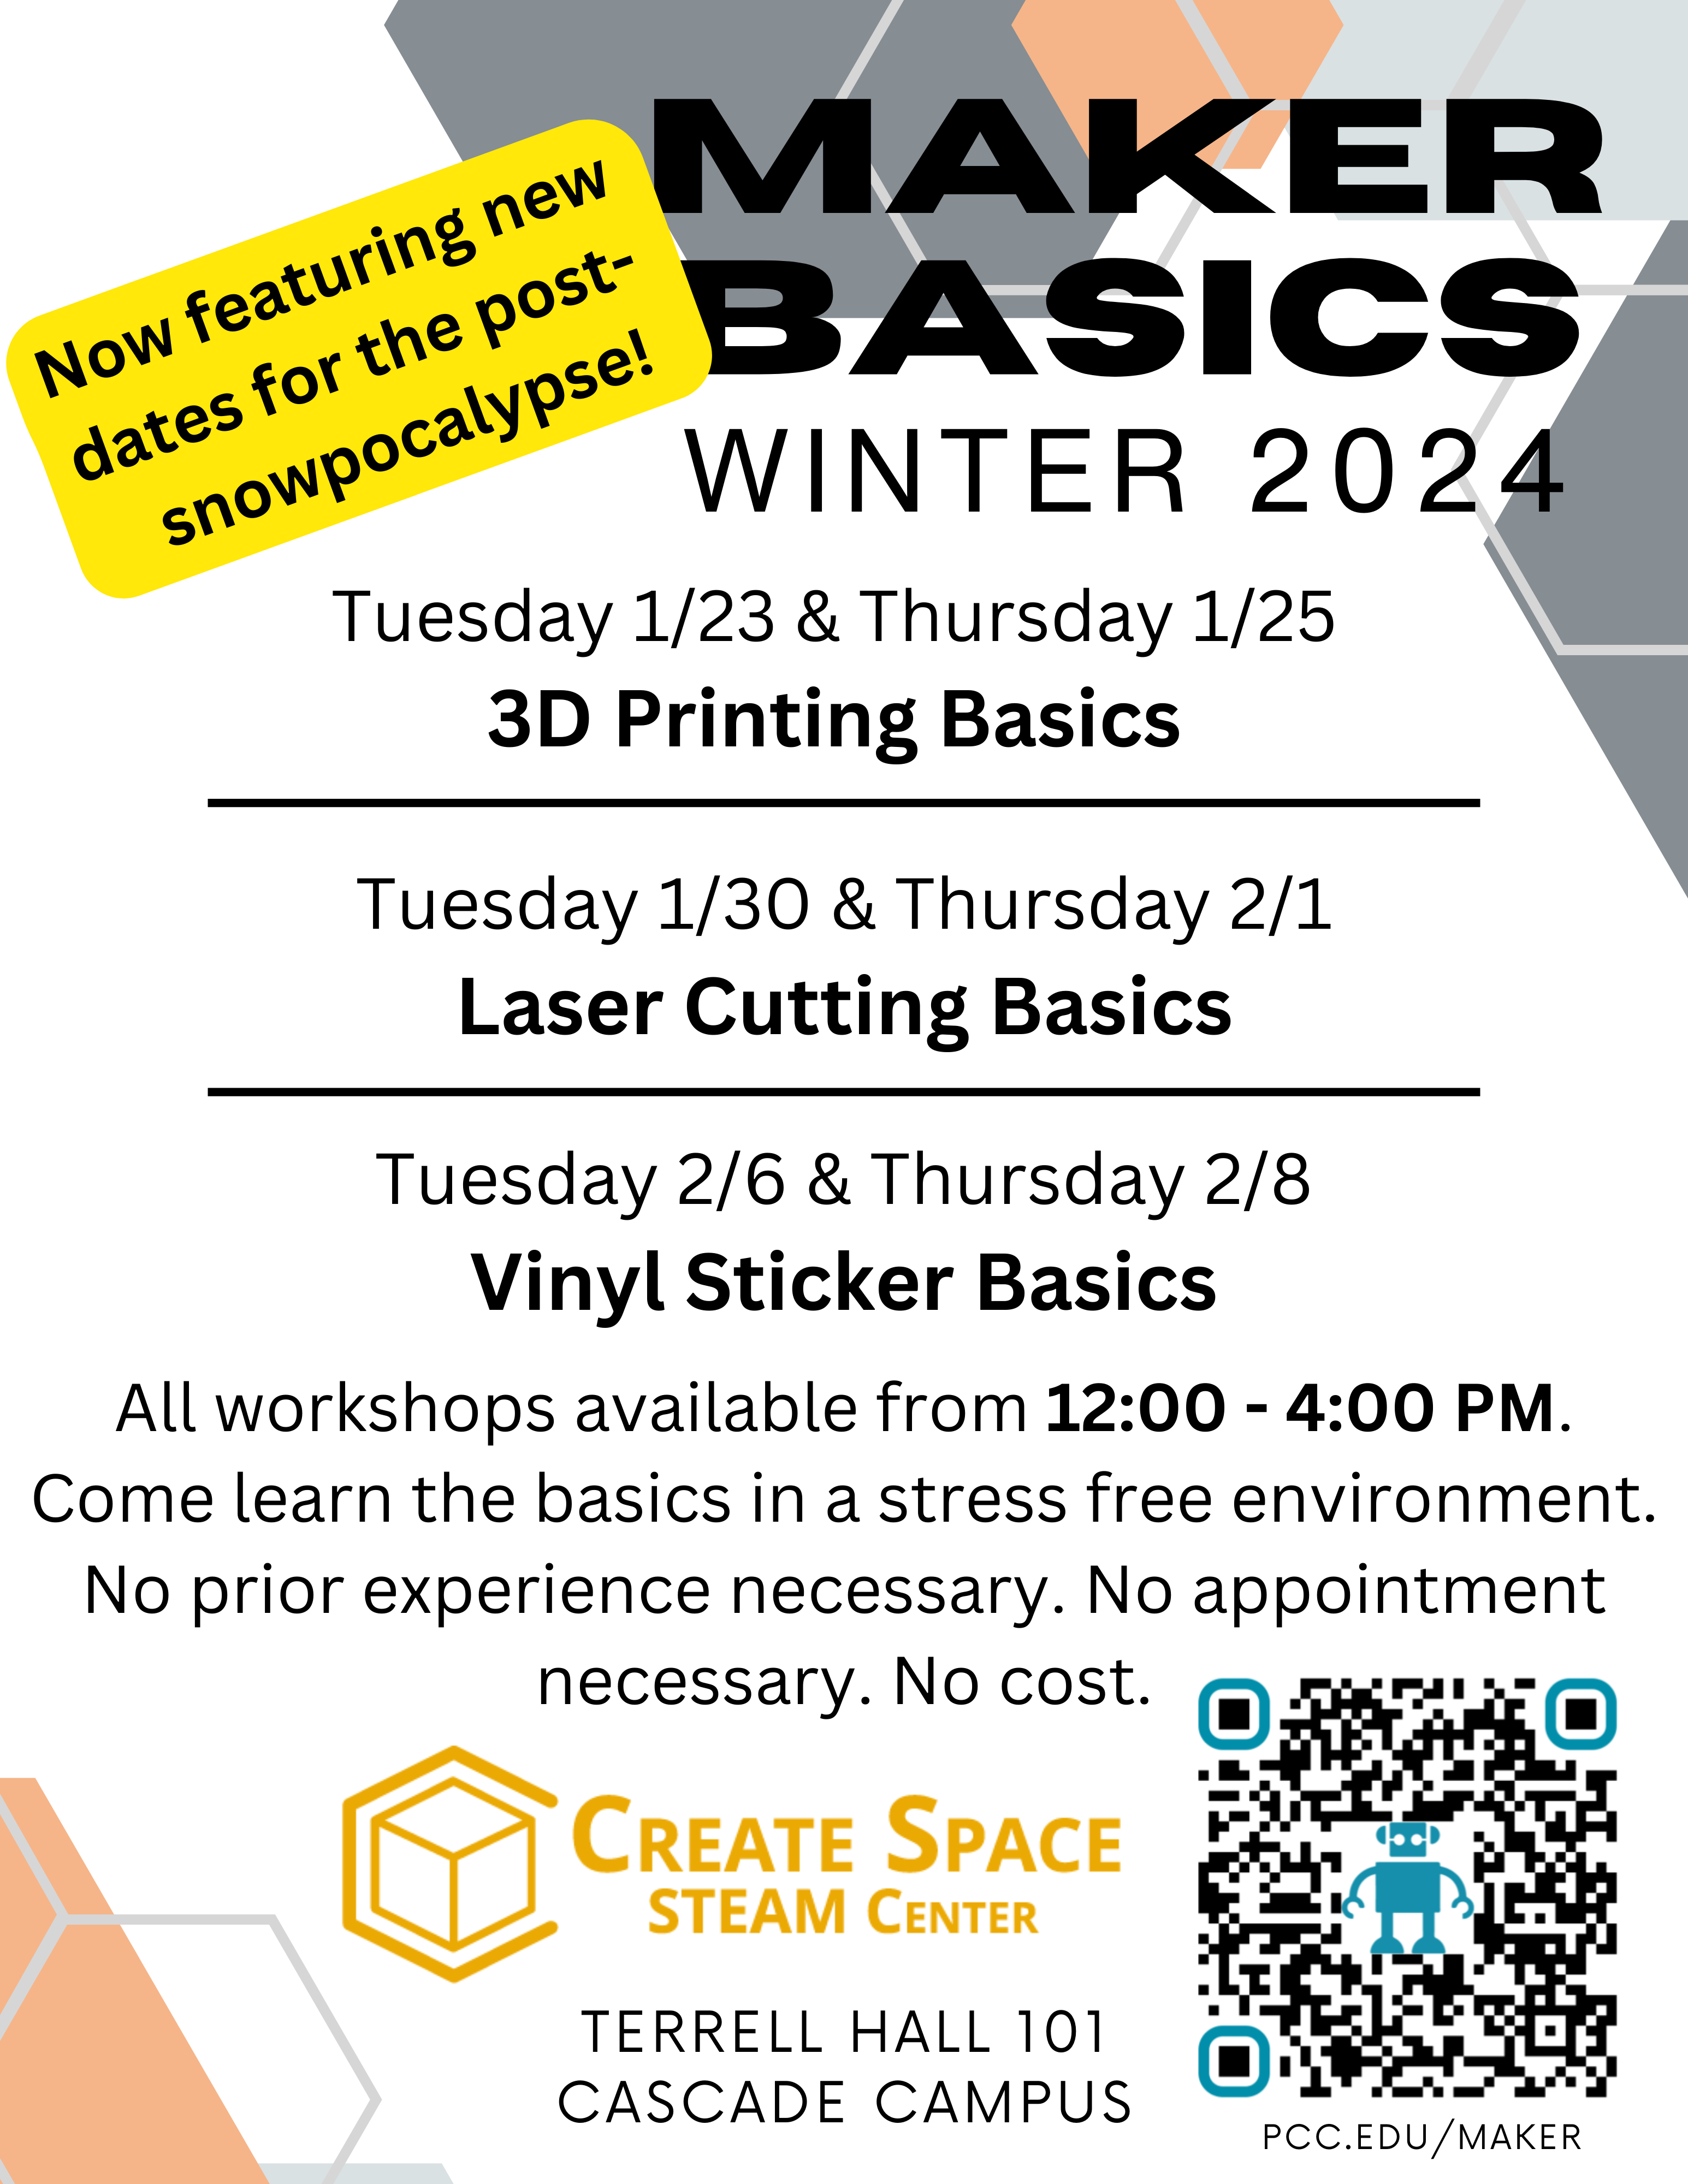 Cascade Create SpaceMaker Basics
Winter 2024

Tuesday 1/23 & Thursday 1/25
3D Printing Basics

Tuesday 1/30 & Thursday 2/1
Laser Cutting Basics

Tuesday 2/6 & Thursday 2/8
Vinyl Sticker Basics

All workshops available from 12:00 - 4:00 PM.
Come learn the basics in a stress free environment.
No prior experience necessary. No appointment necessary. No cost.

pcc.edu/maker
Terrell Hall 101
Cascade Campus